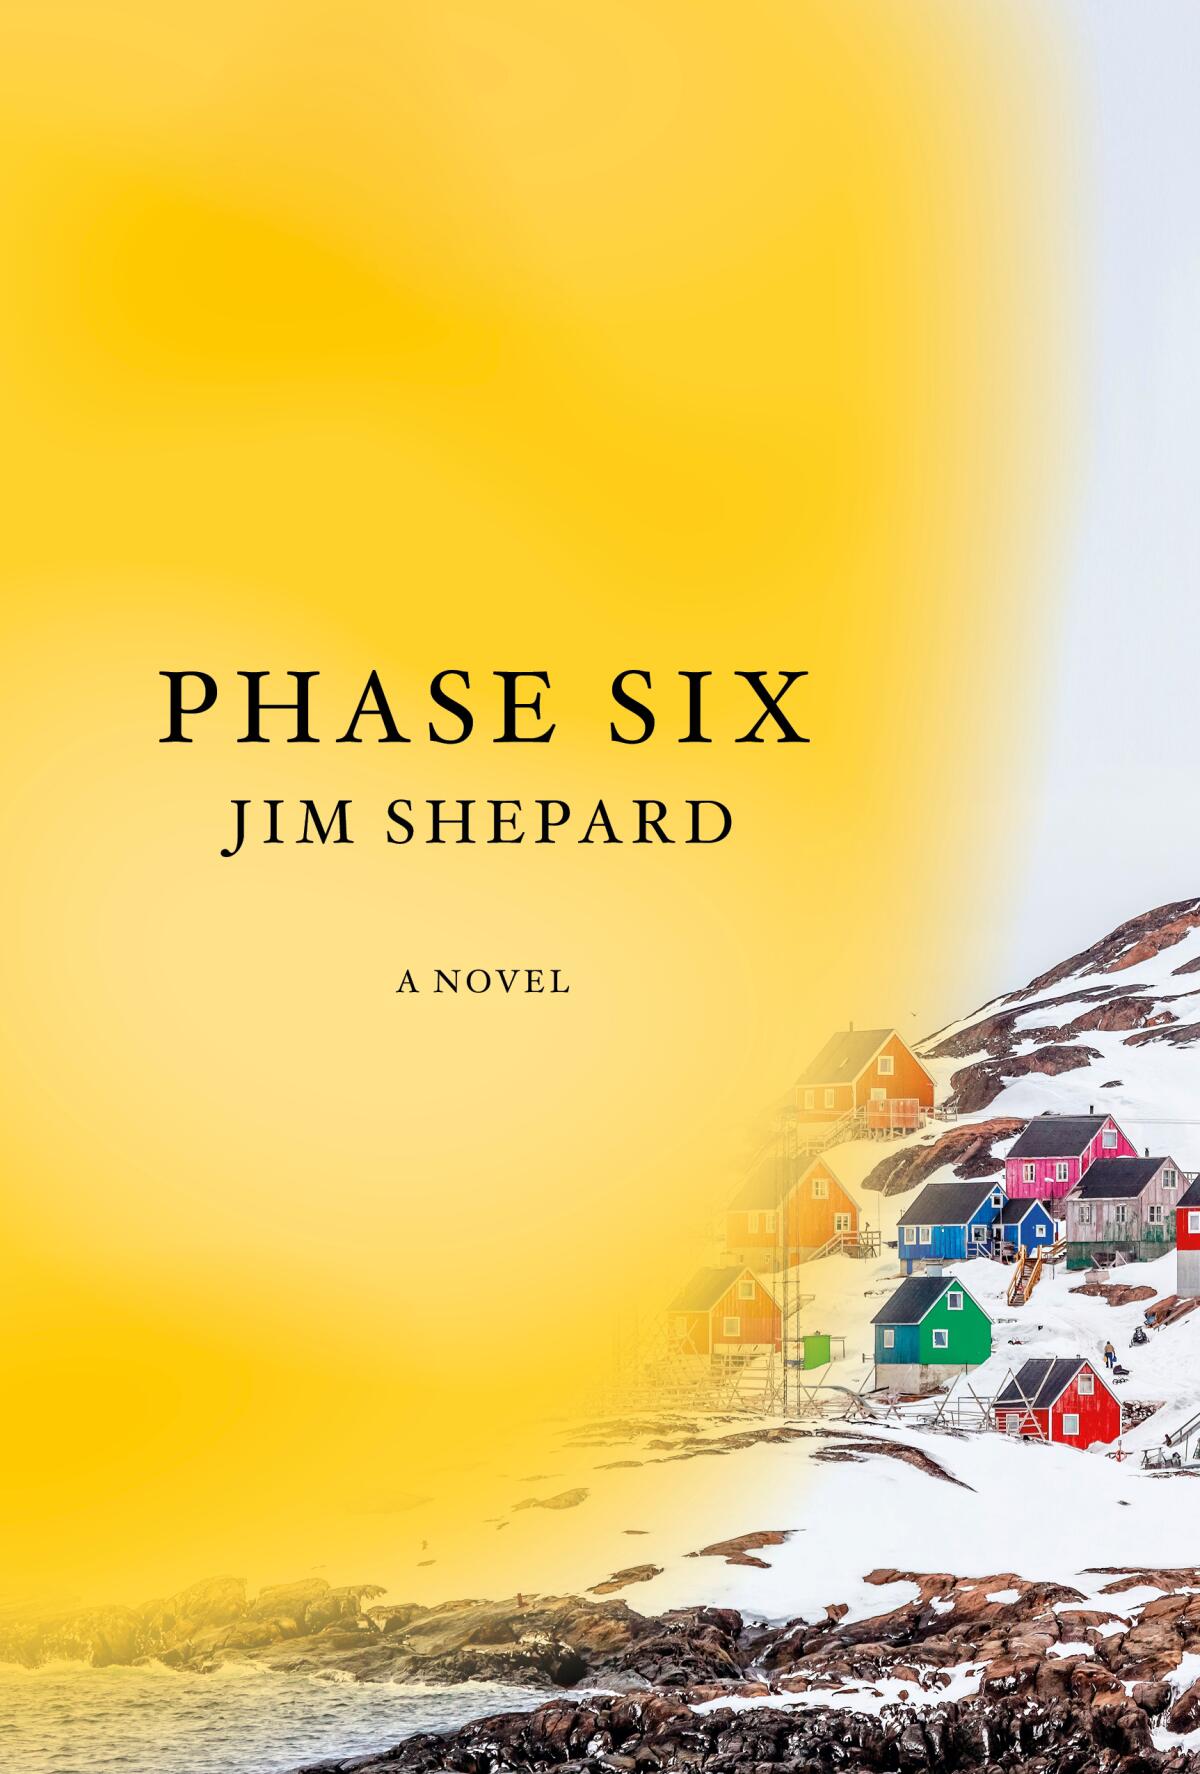 The cover of the novel "Phase Six" by Jim Shepard